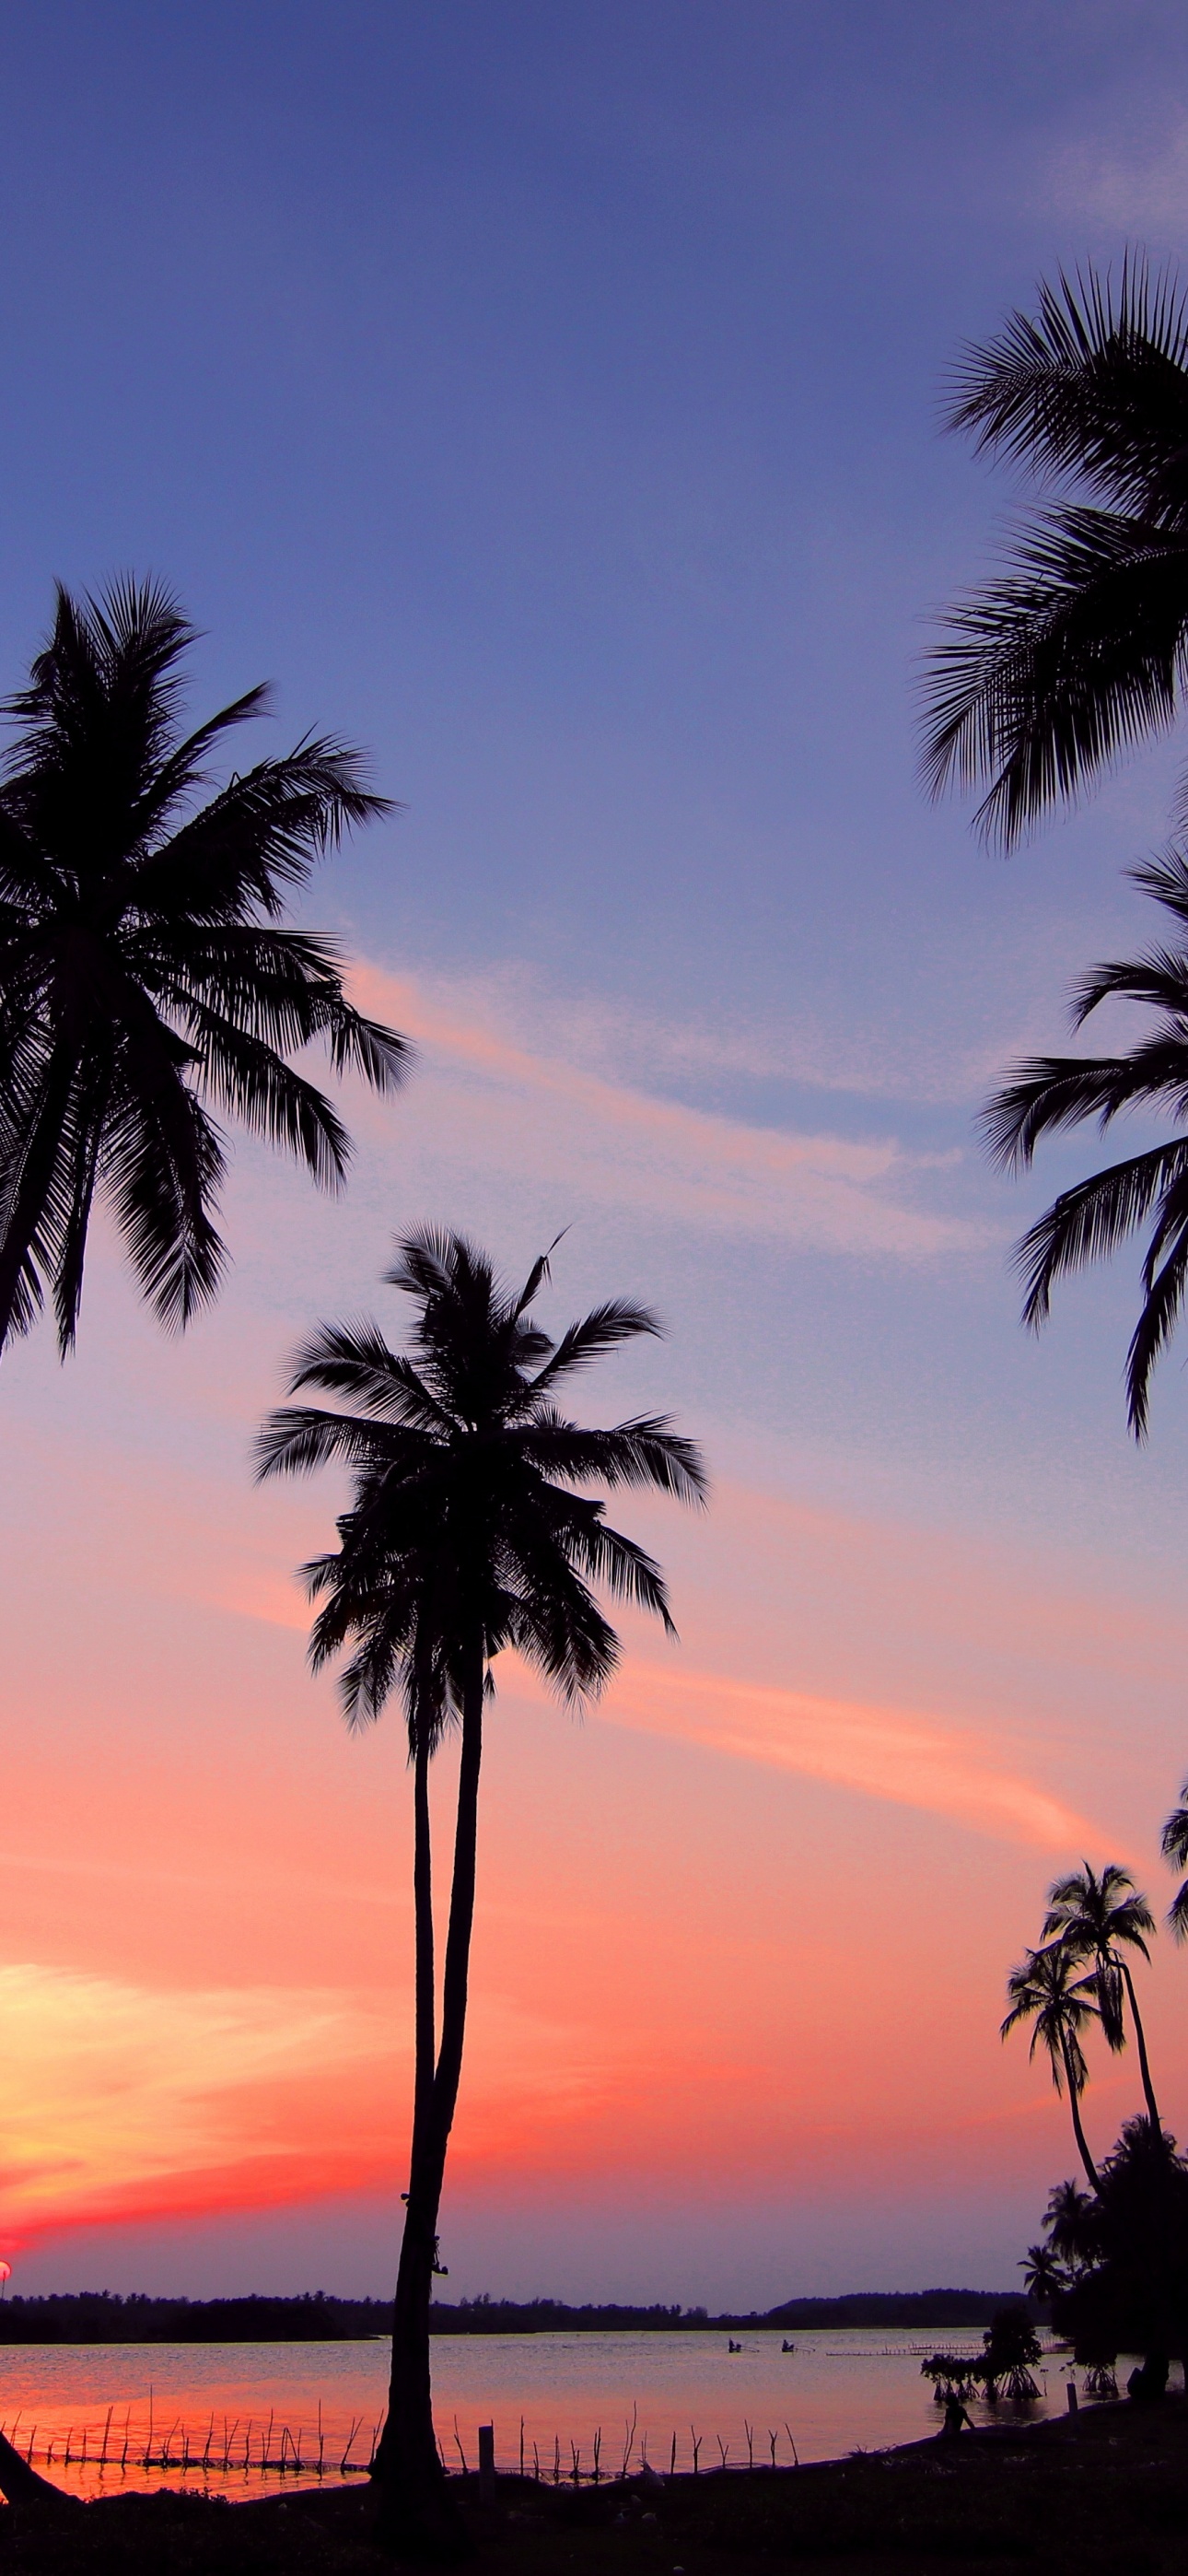 Sea Palm Tree Beach Colorful Sky Sunset Images Summer Hd Wallpaper   Wallpapers13com